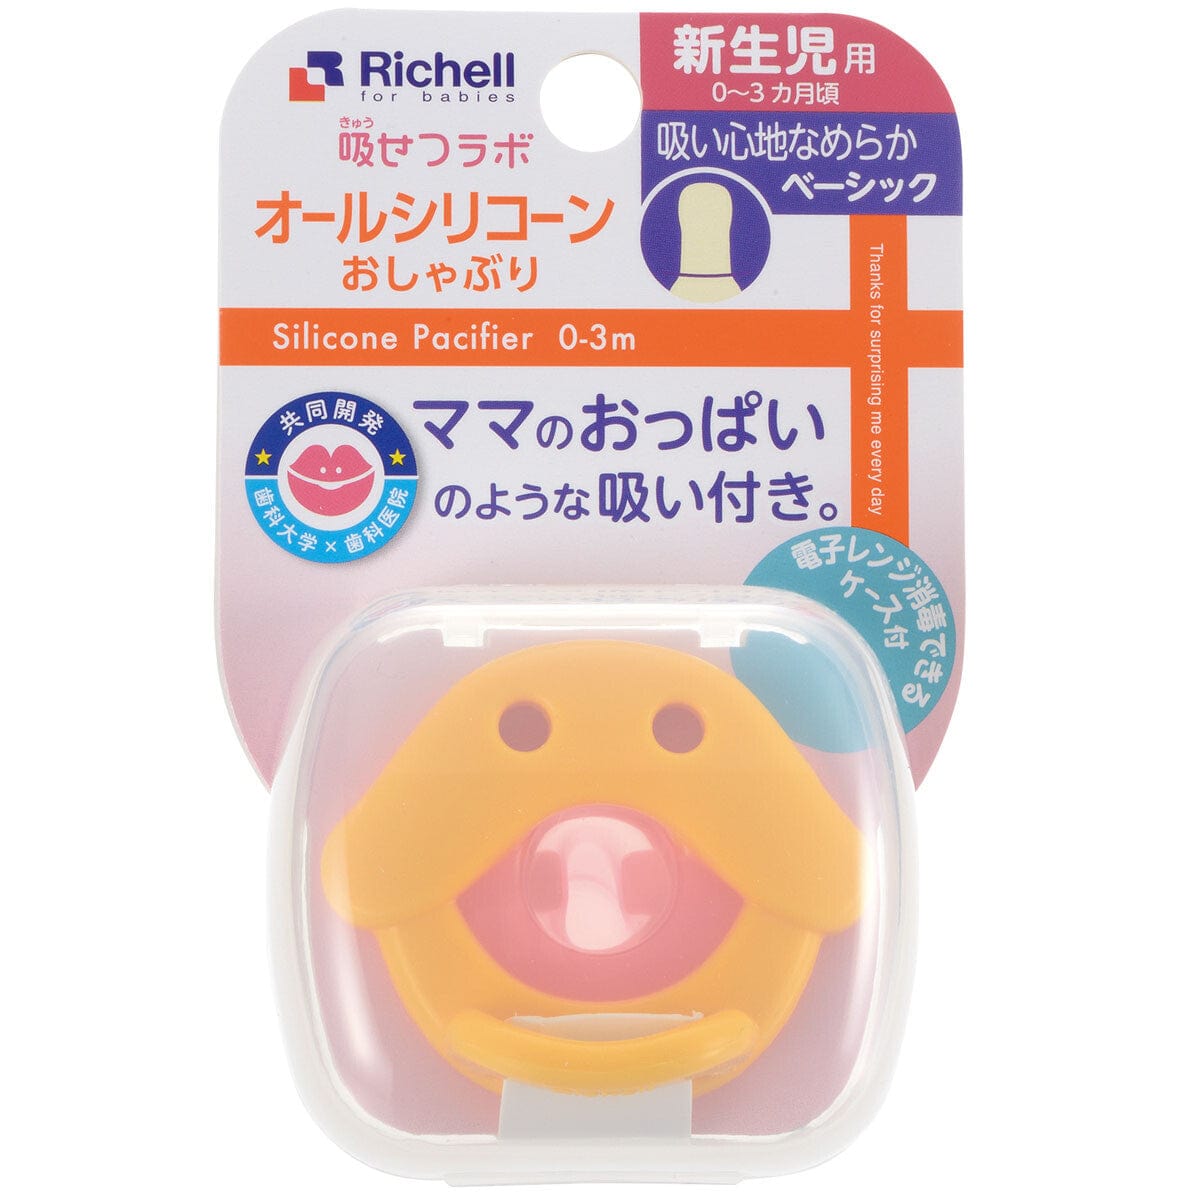 Richell - New Born Baby Silicone Pacifier with Storage Case -  Baby Pacifiers  Durio.sg